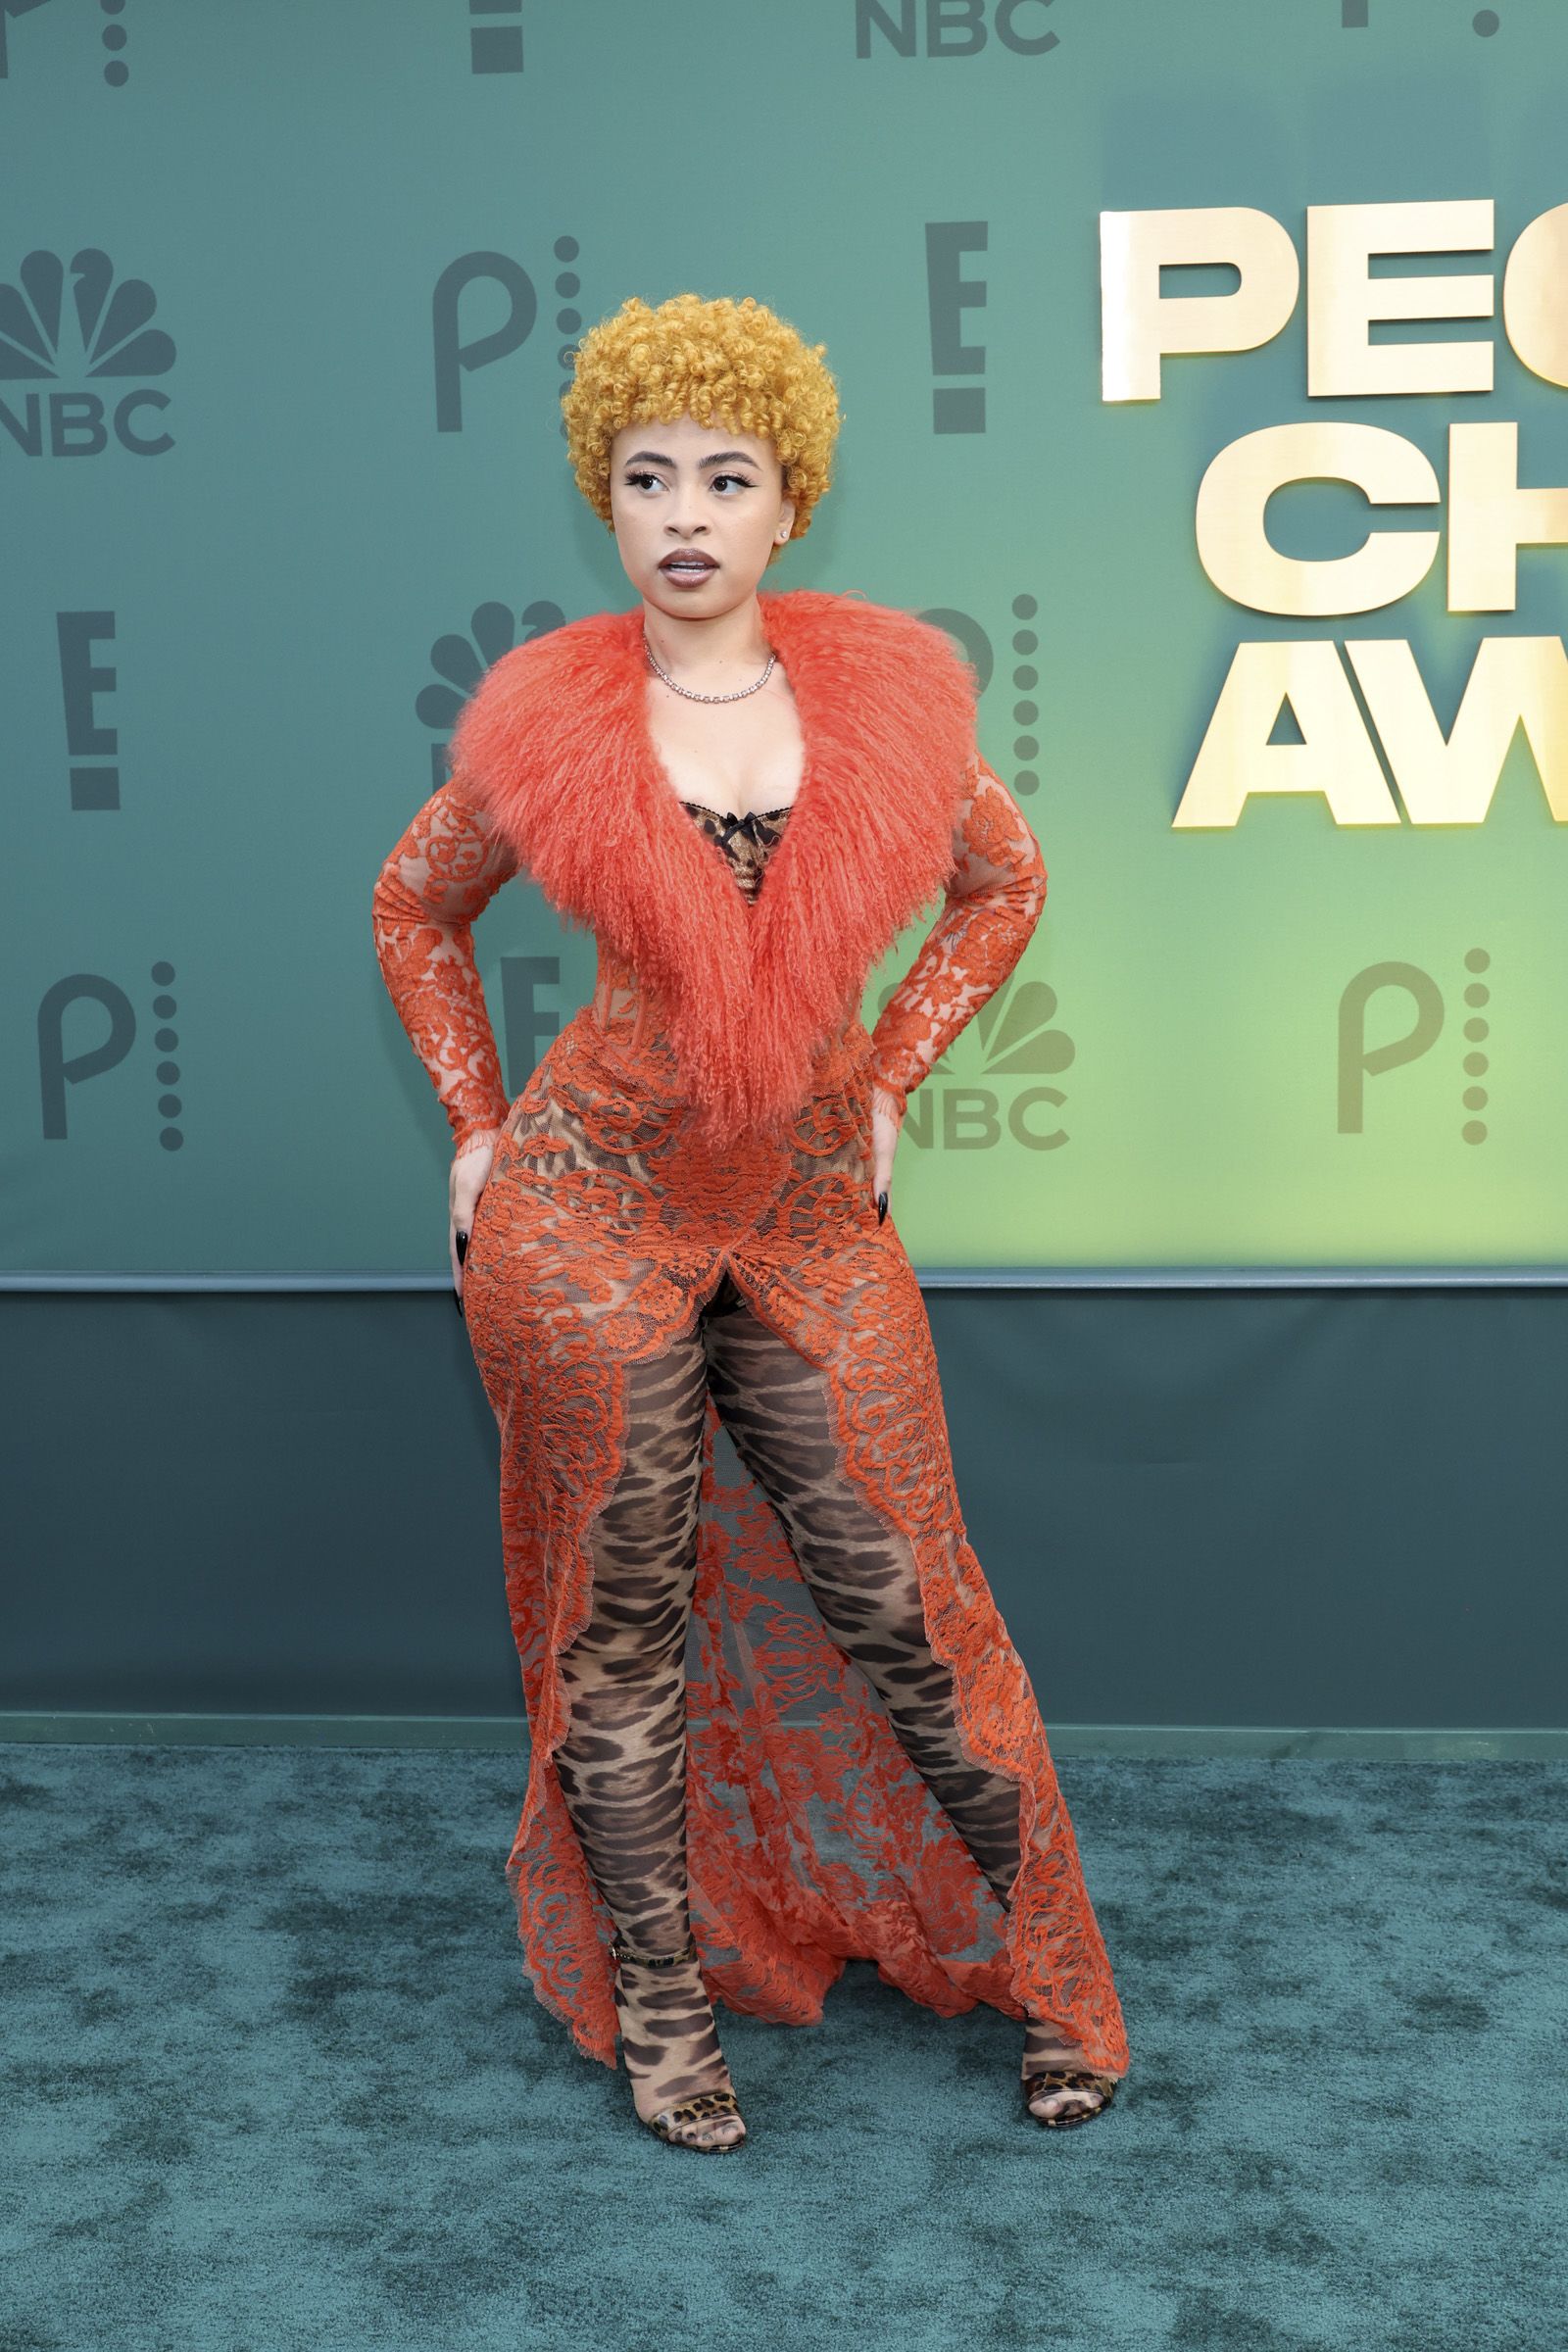 Ice Spice's outfit certainly stood out on the red carpet, mixing colors, textures, patterns and styles.